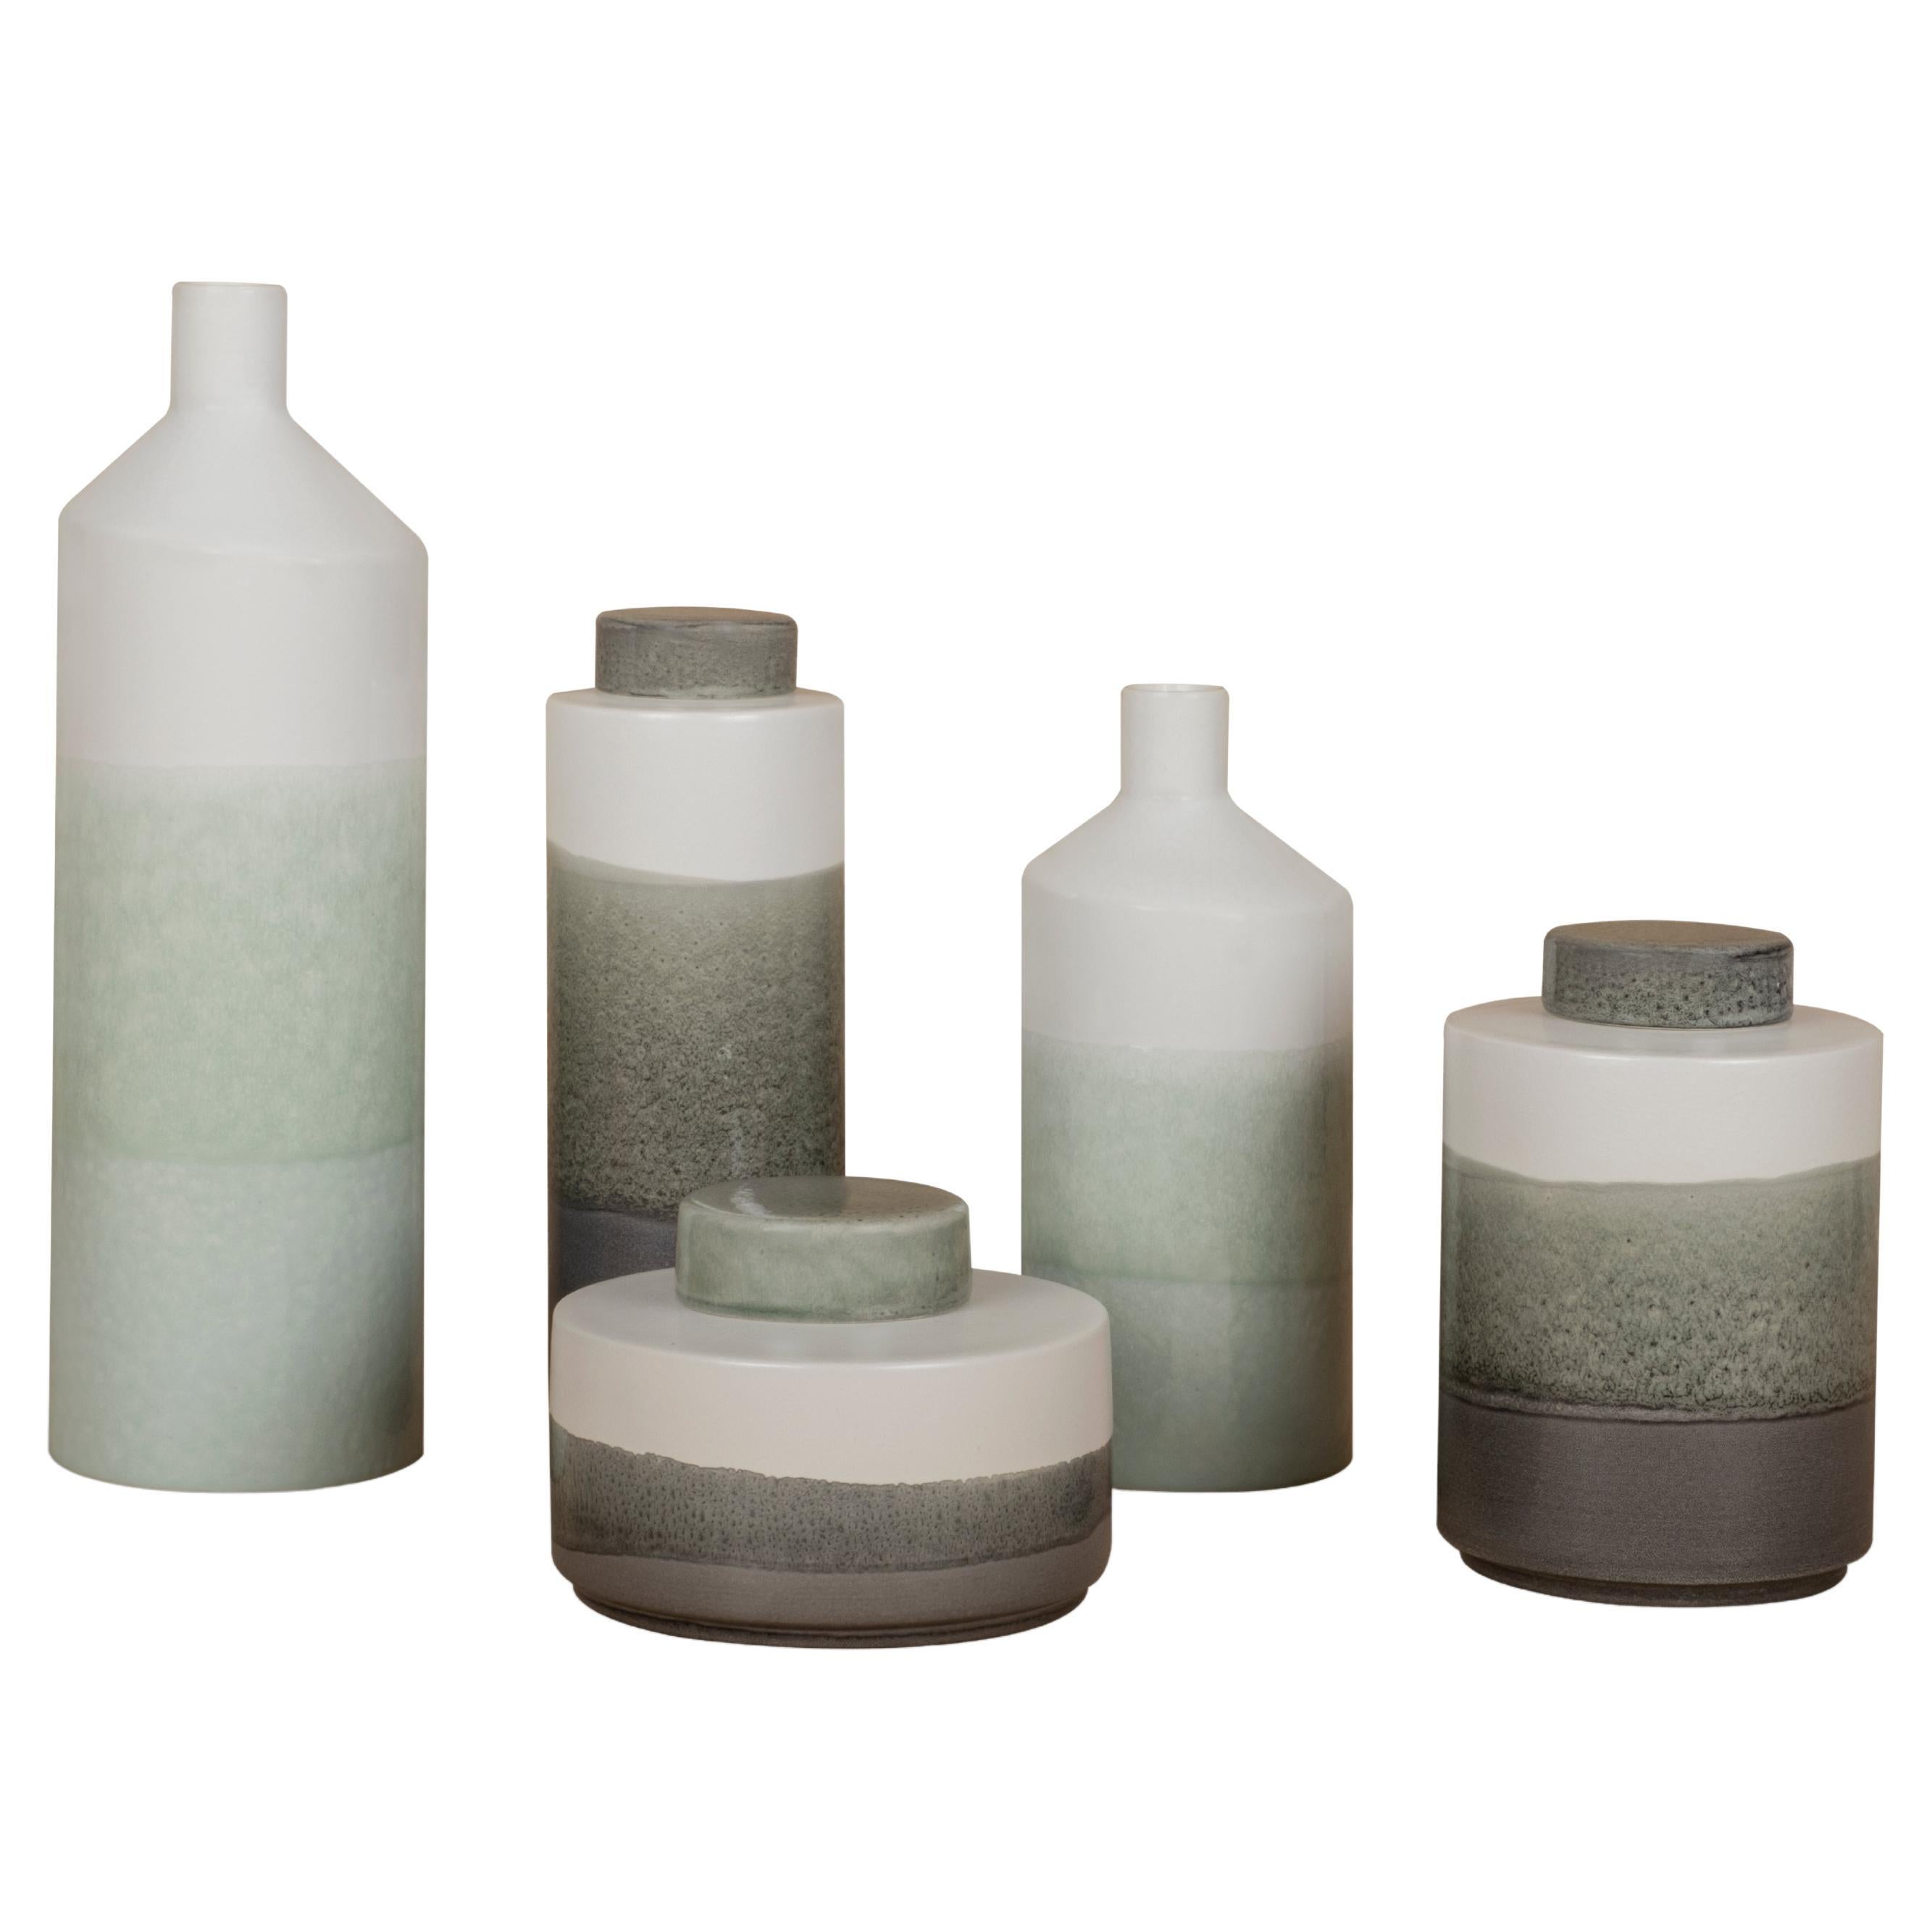 Modern Set of 5 Ceramic Pots Handcrafted in Portugal by Greenapple